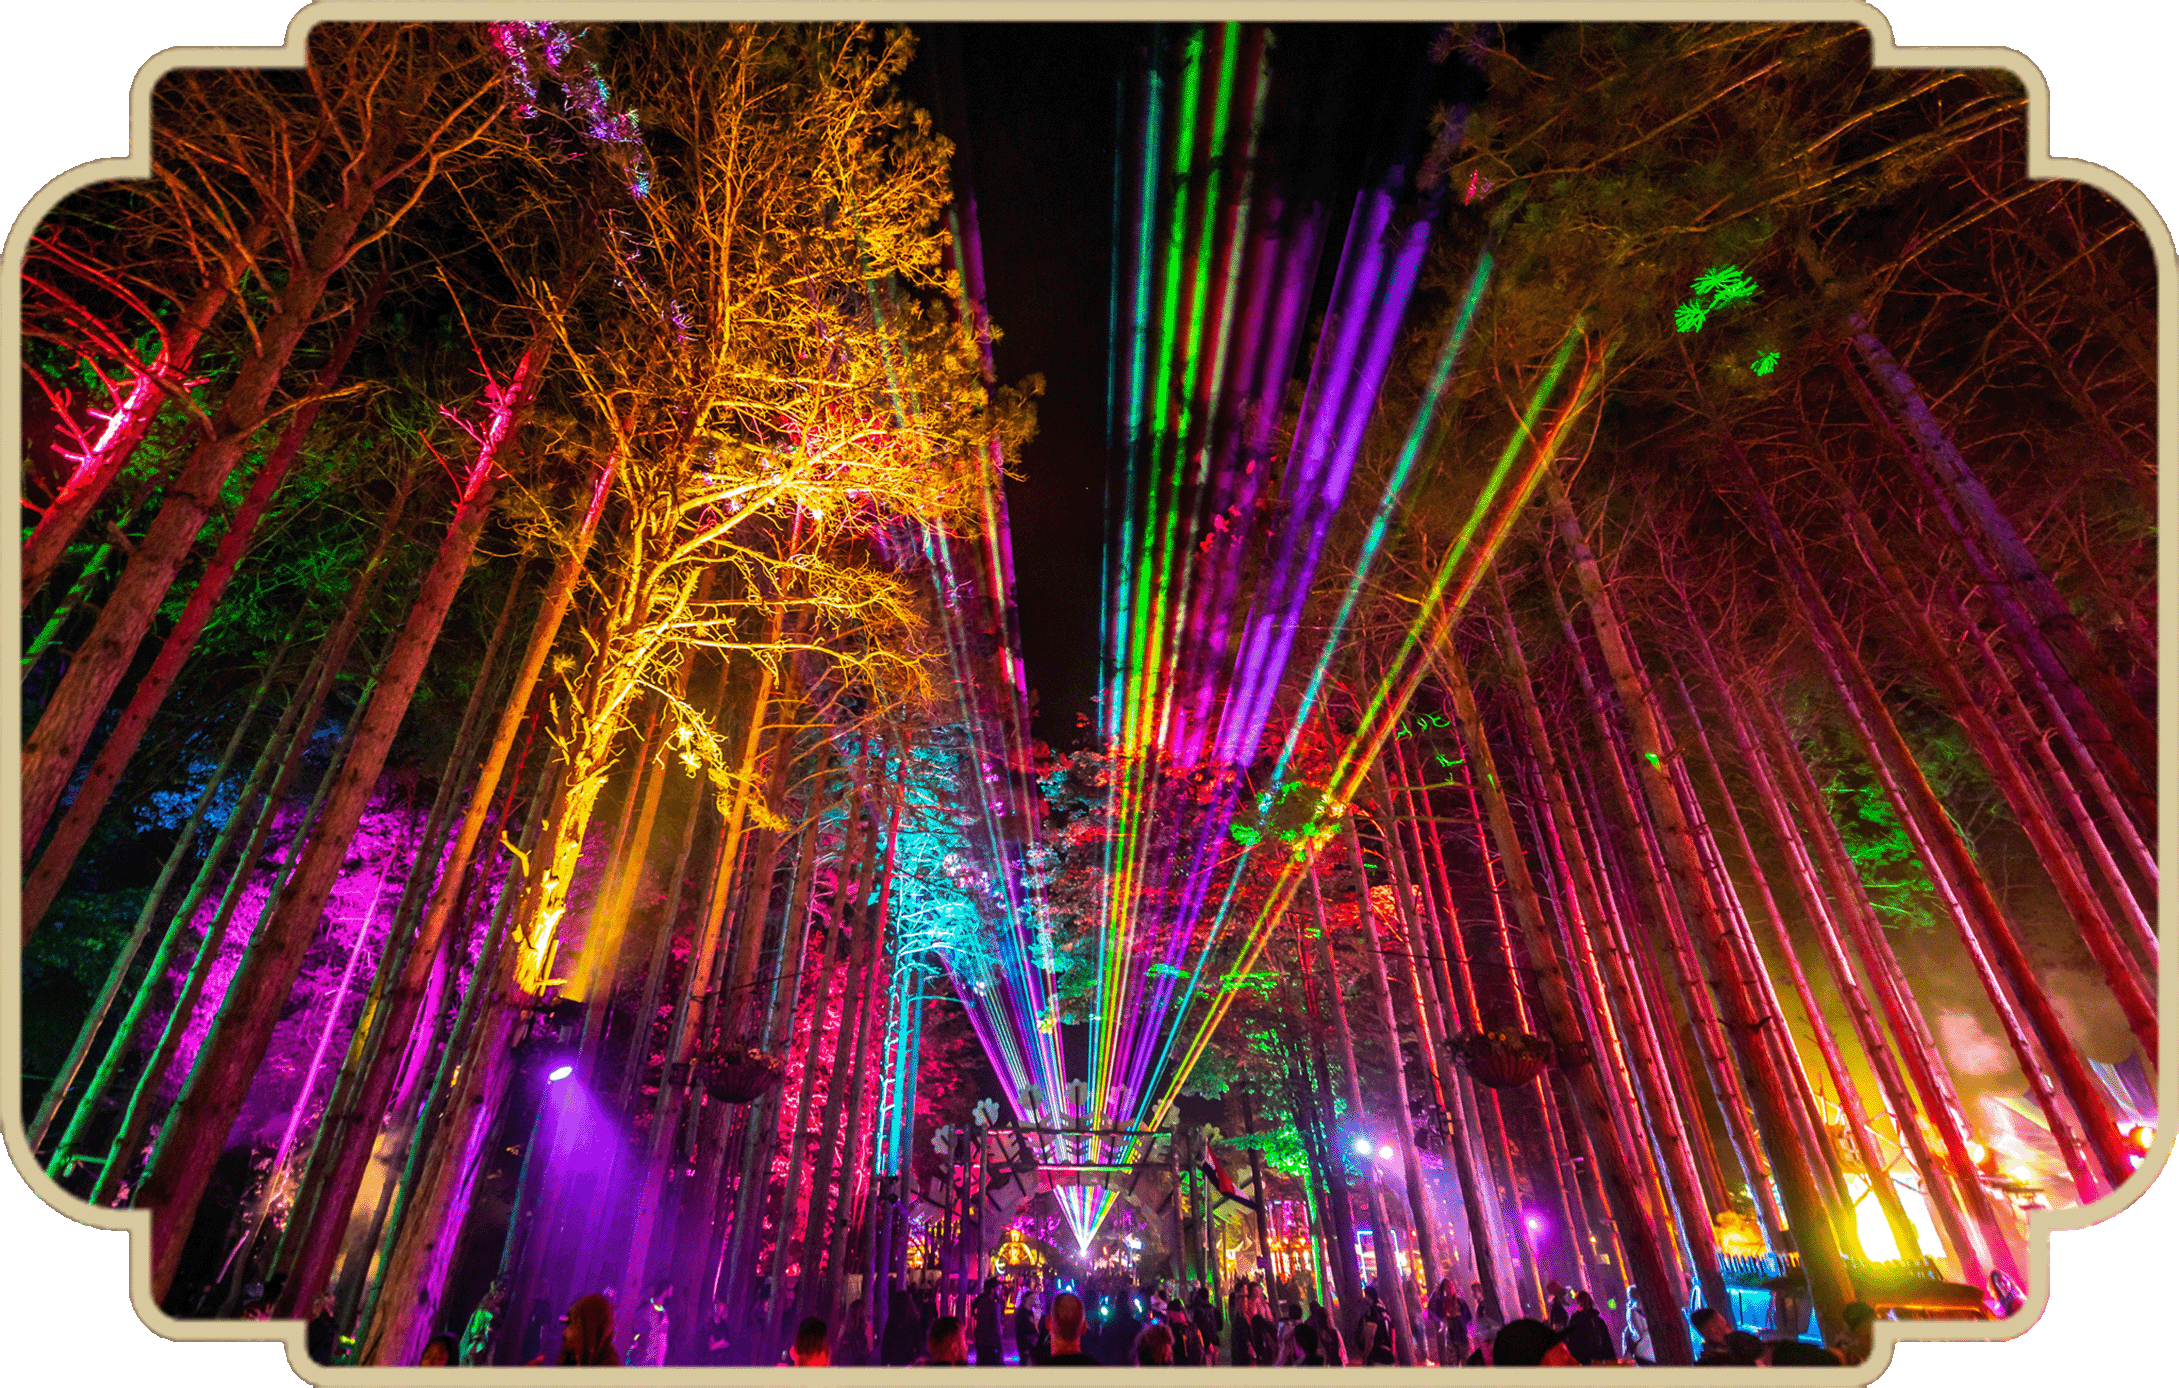 THE FINAL MUSIC, ART & FOREST FOOD LINEUPS FOR ELECTRIC FOREST 2023 ⚡